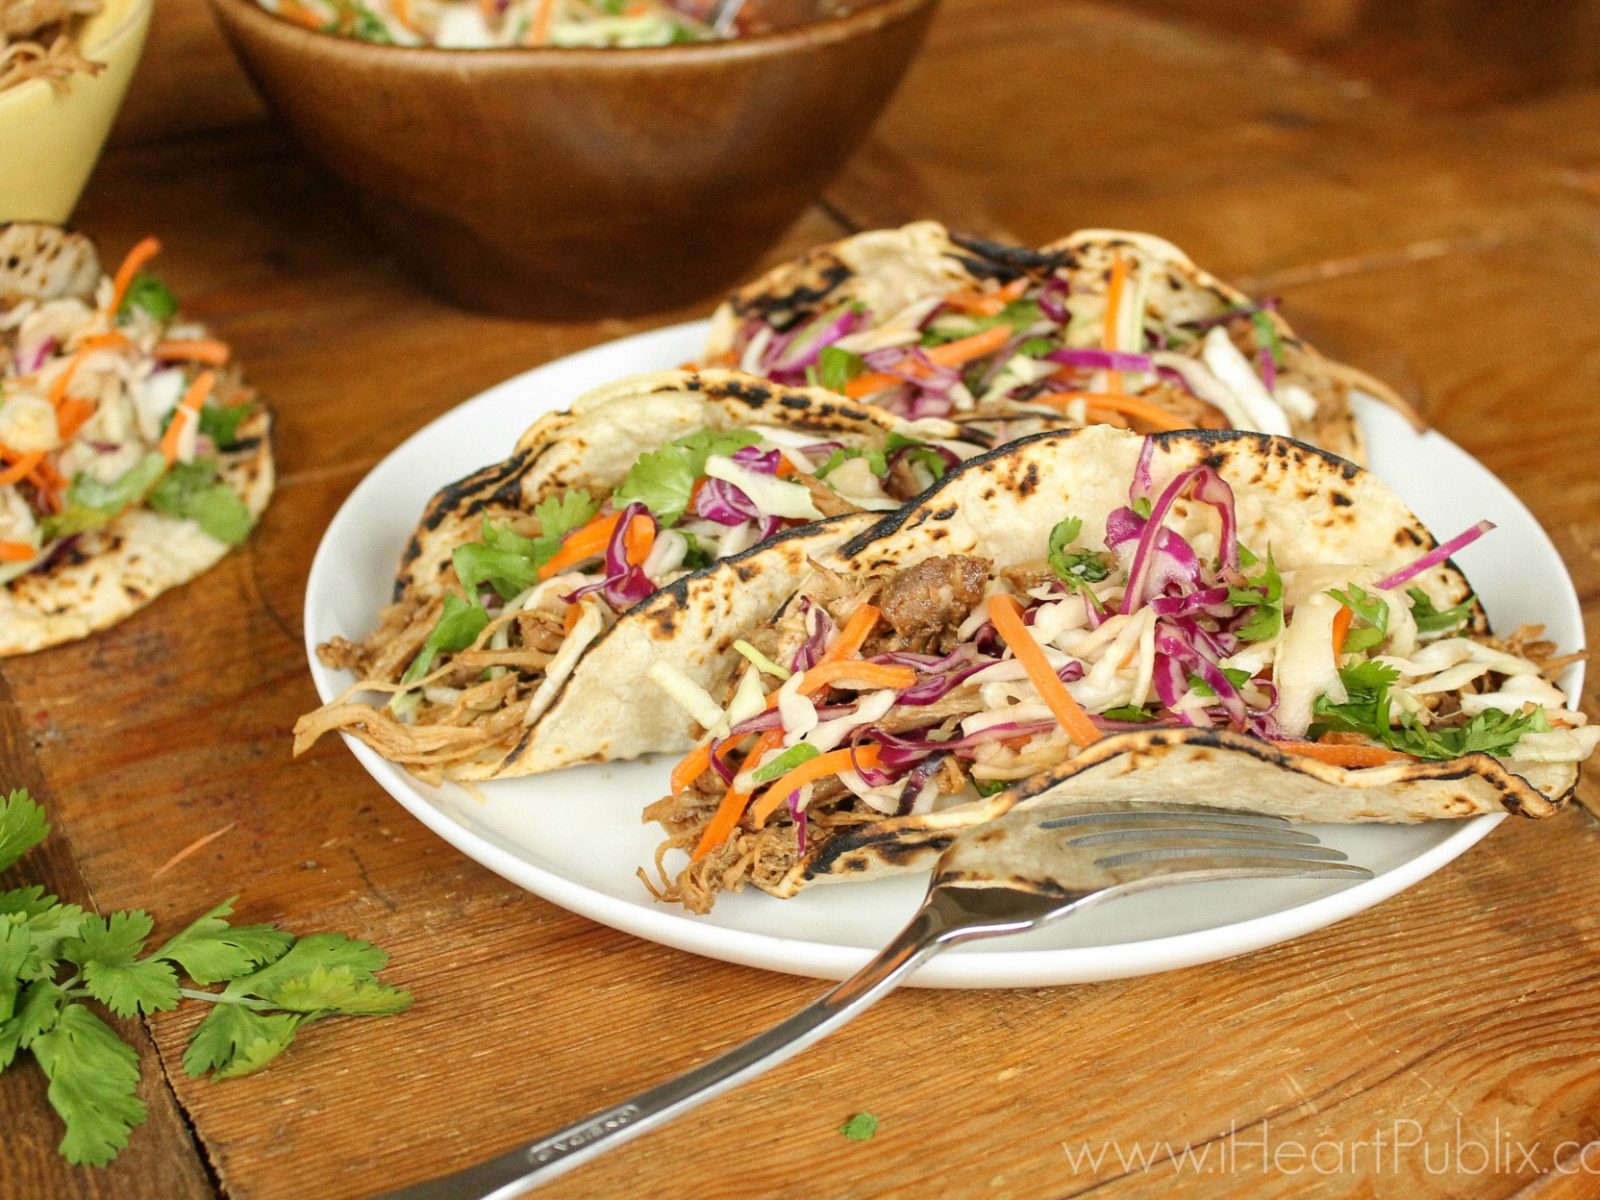 Try My Asian BBQ Pork Tacos With The Smithfield Marinated Fresh Pork Coupon + Reminder To Enter The Shake it Up with Smithfield Fresh Pork Contest